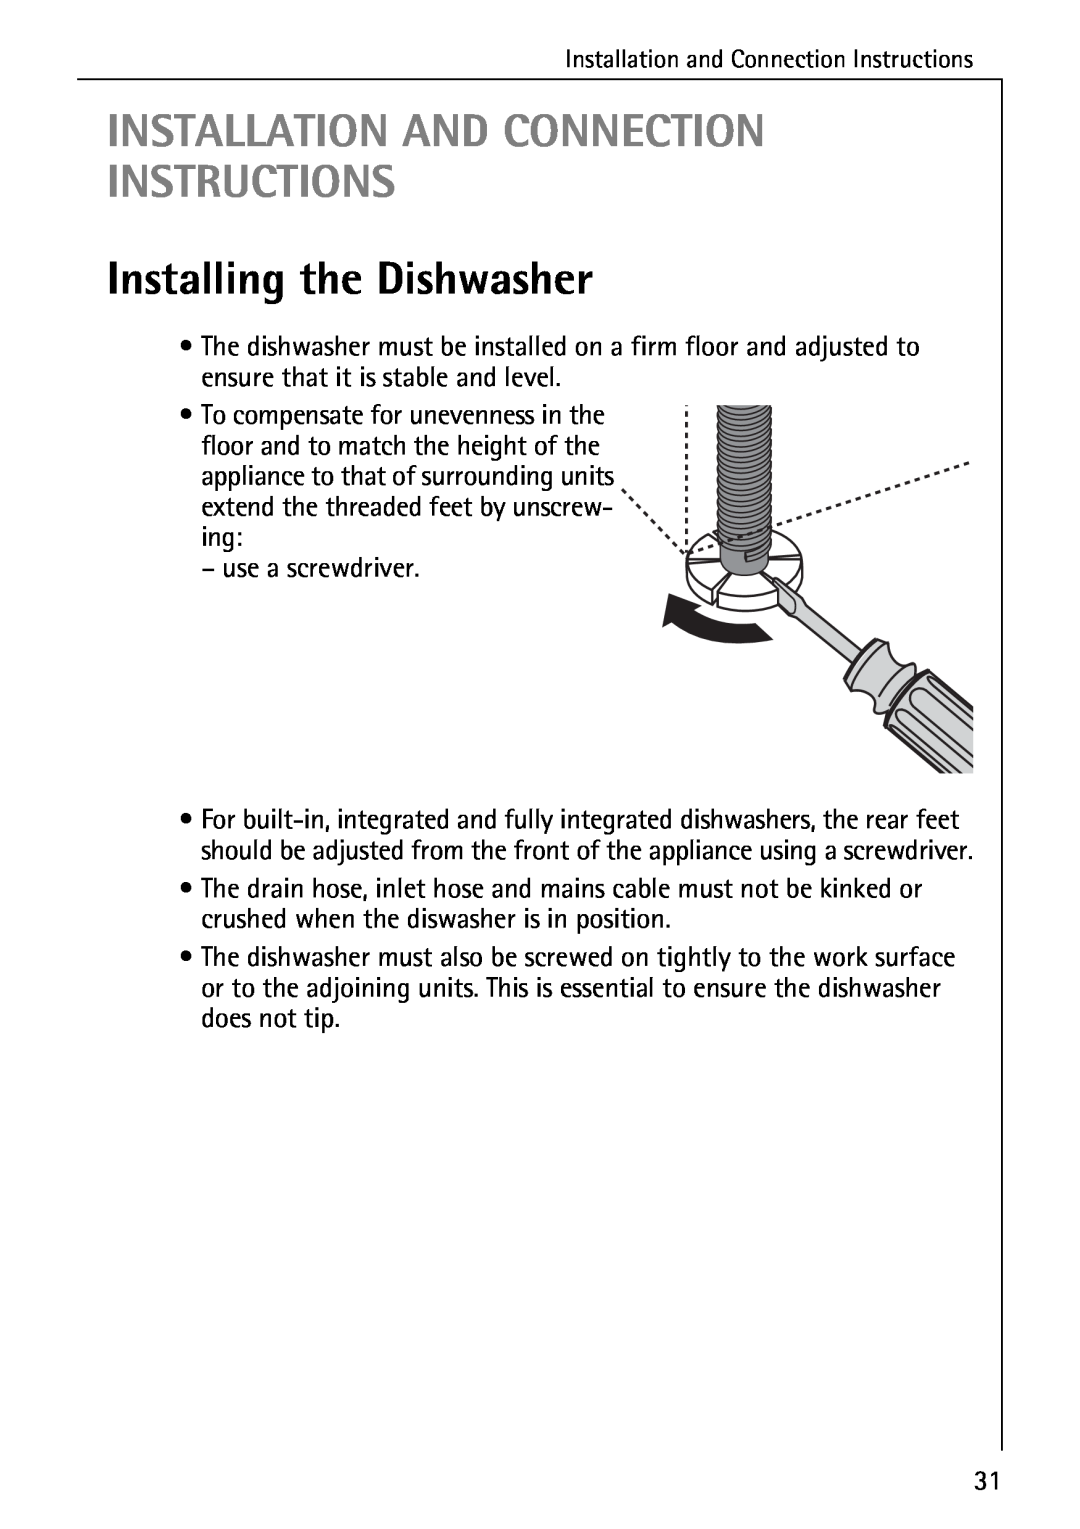 AEG 4270 I manual Installation And Connection Instructions, Installing the Dishwasher 